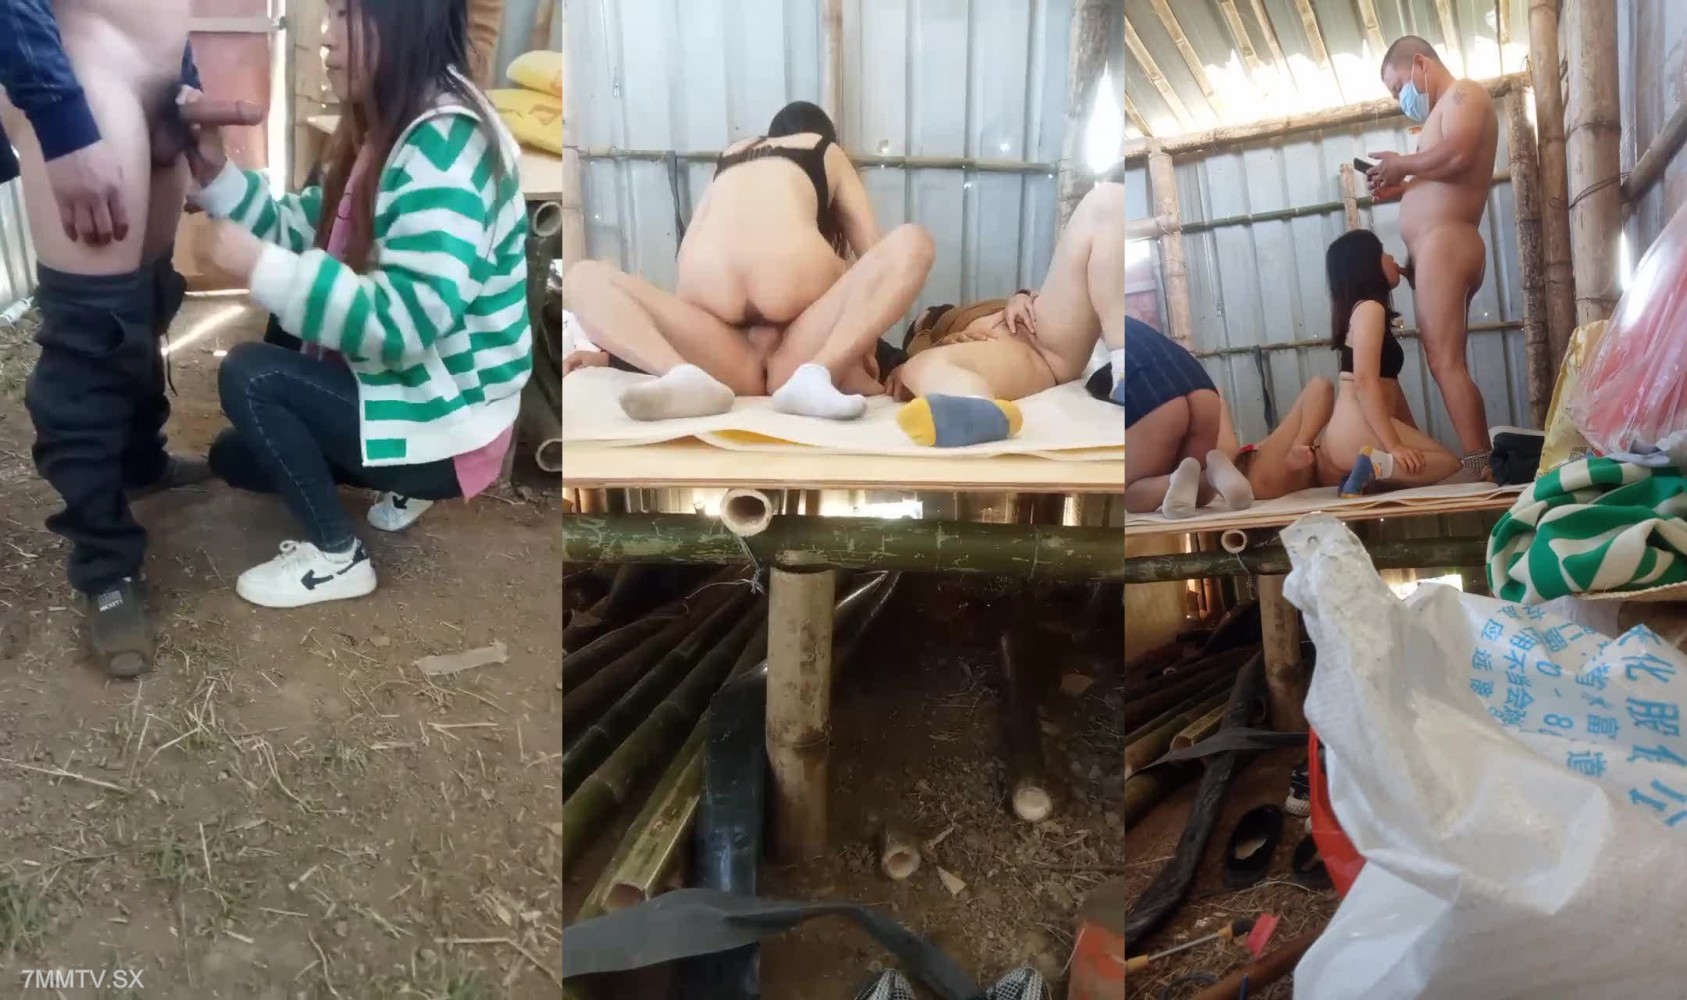 Rural 4P Wife-swapping Games Hook Up With Passionate Sex, Show Live In A Simple Shed, Blowjob With Big Dick Before Taking Off Clothes - 7mmtv.sx image